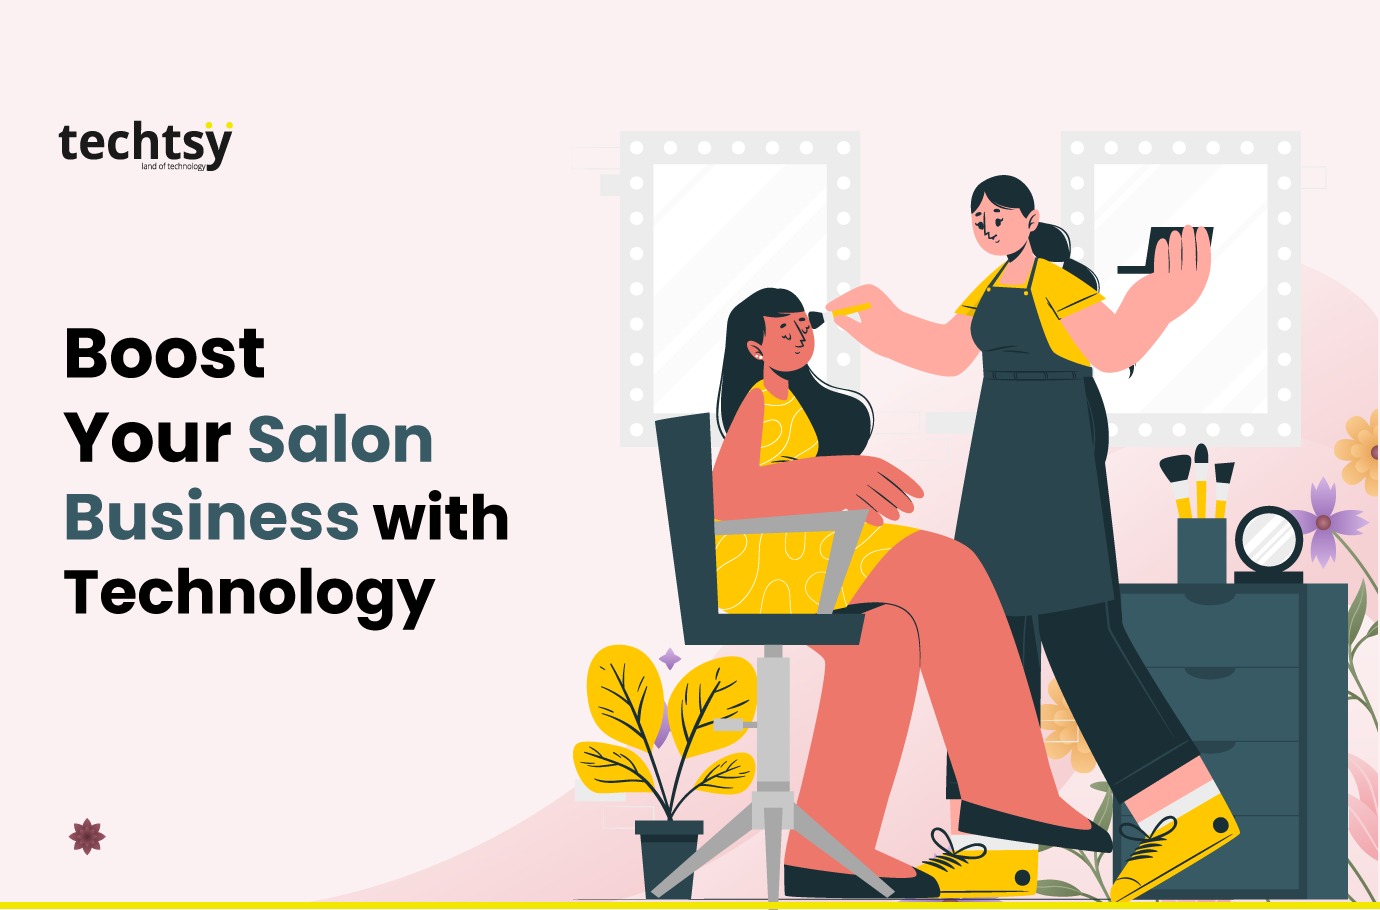 How Technology Can Help You Grow Your Salon Business